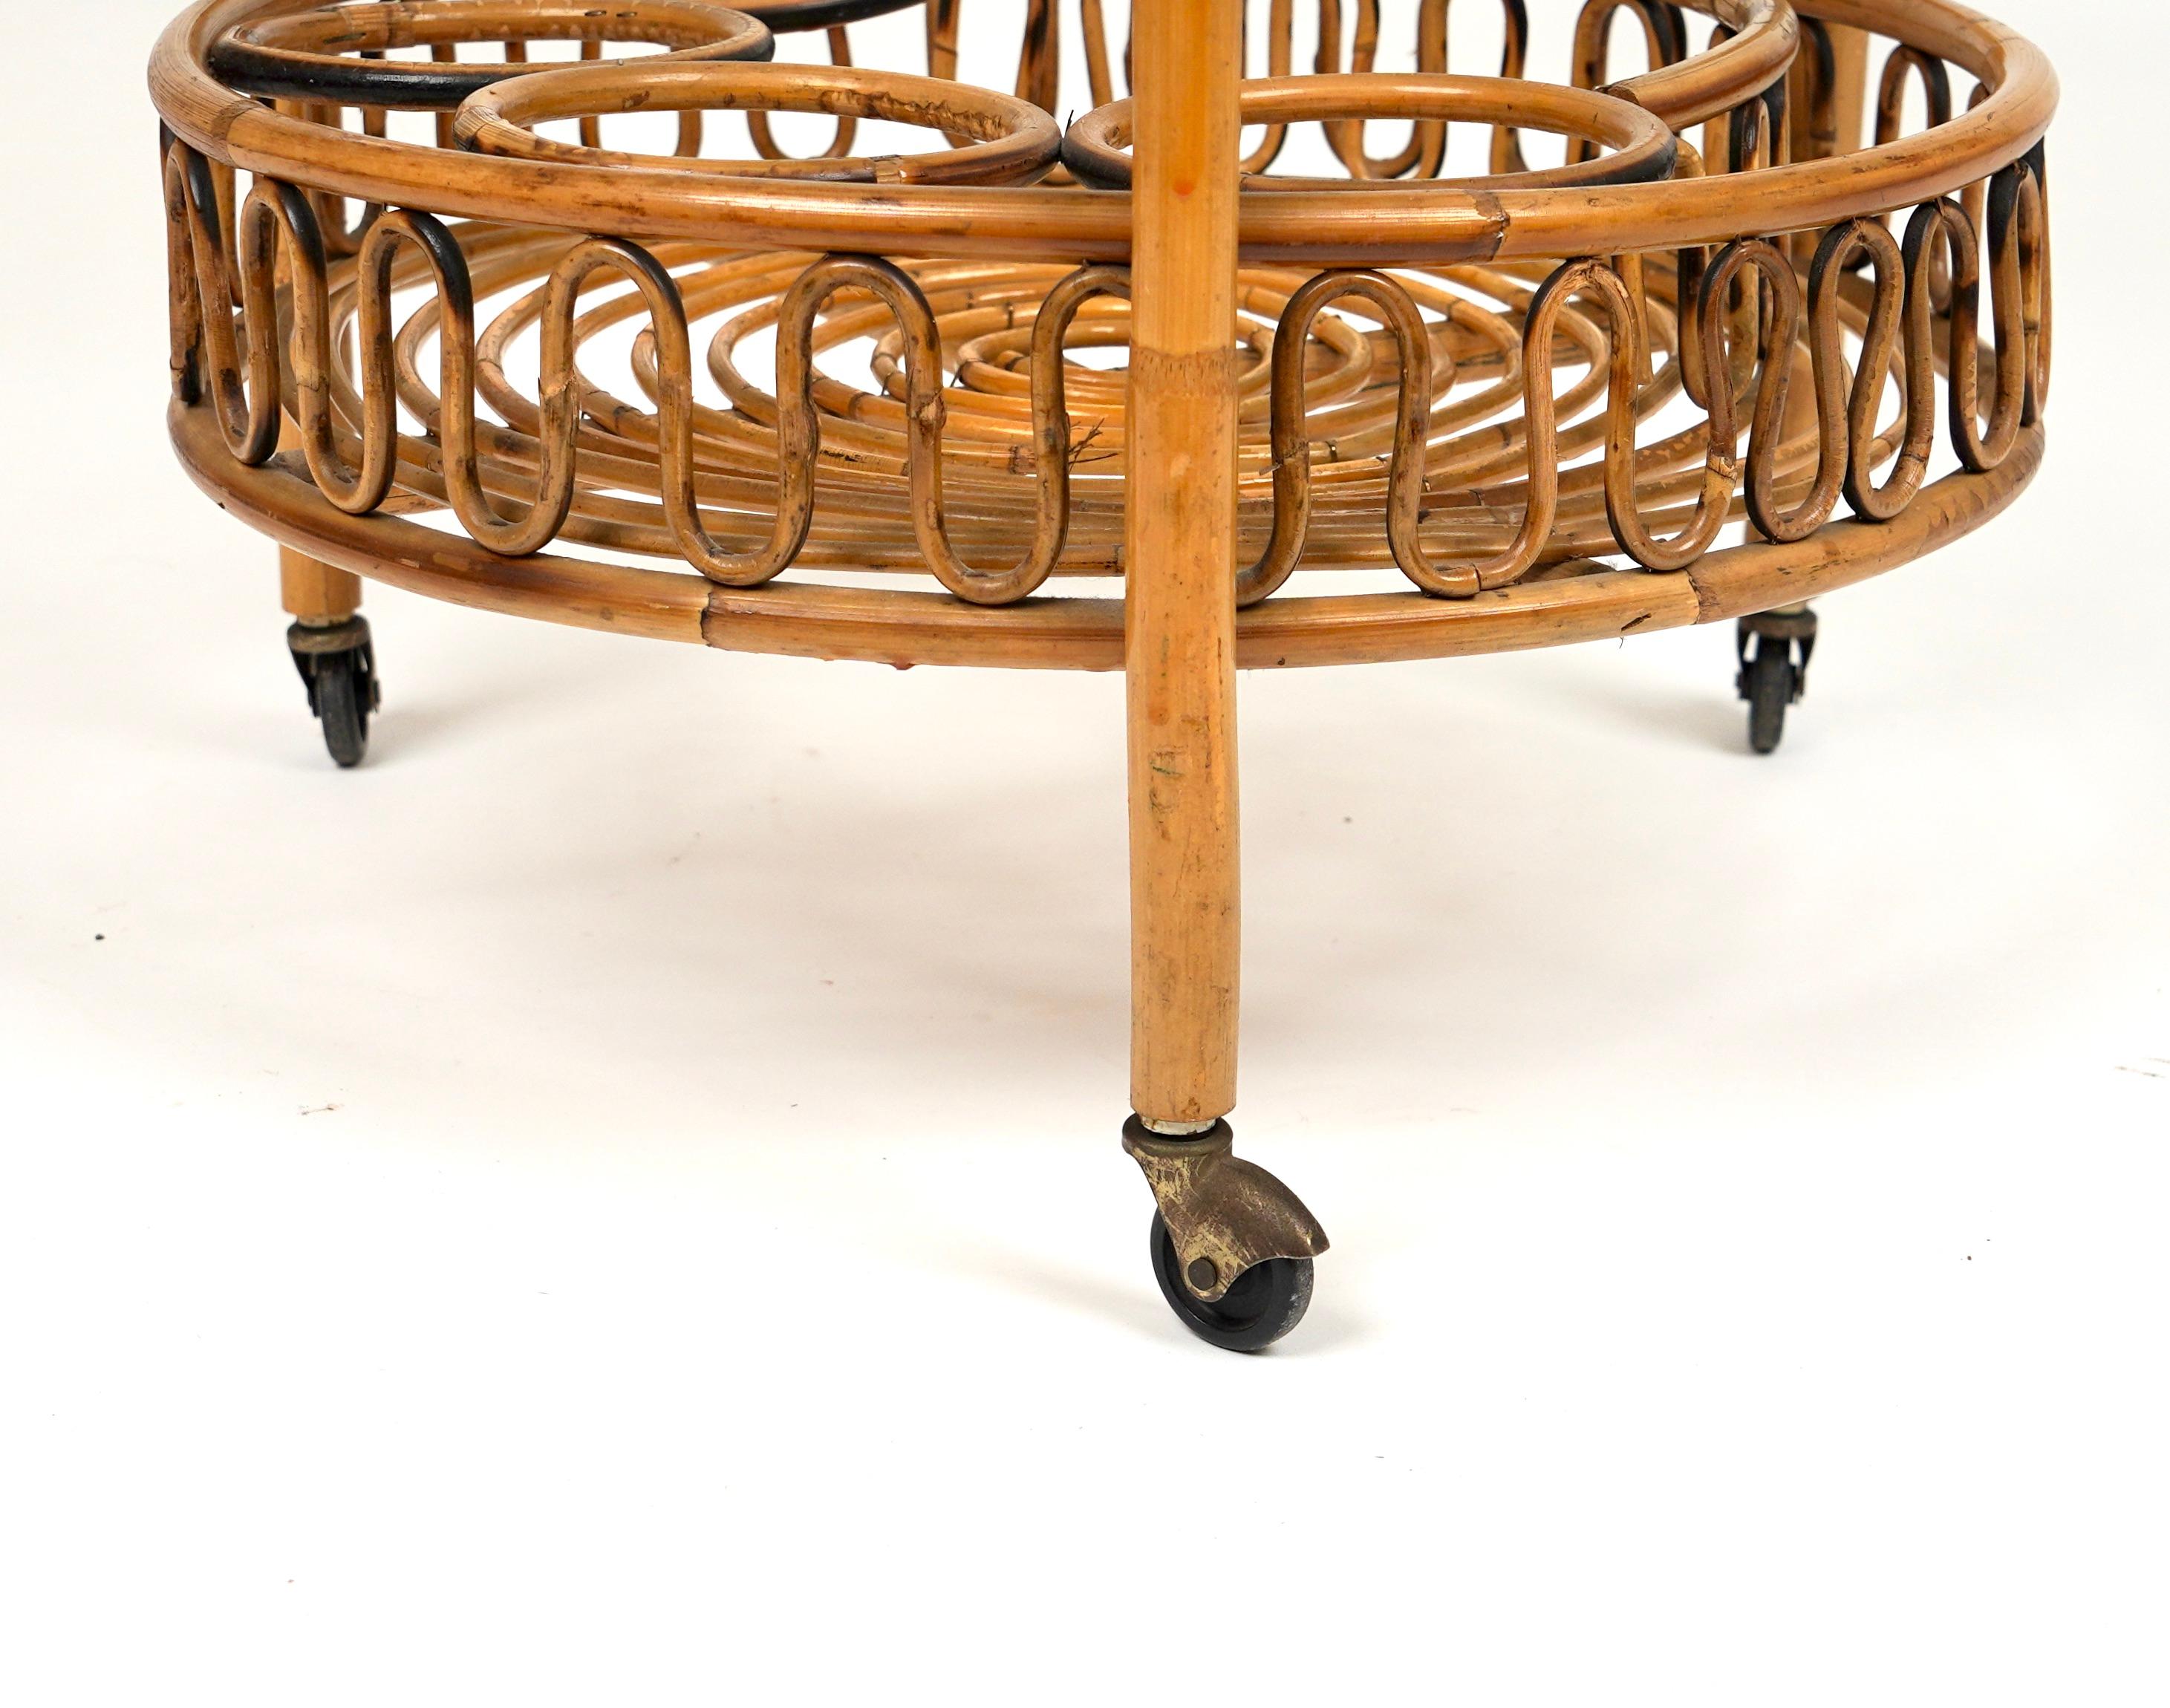 Midcentury Bamboo and Rattan Round Serving Bar Cart Trolley, Italy, circa 1960s For Sale 6